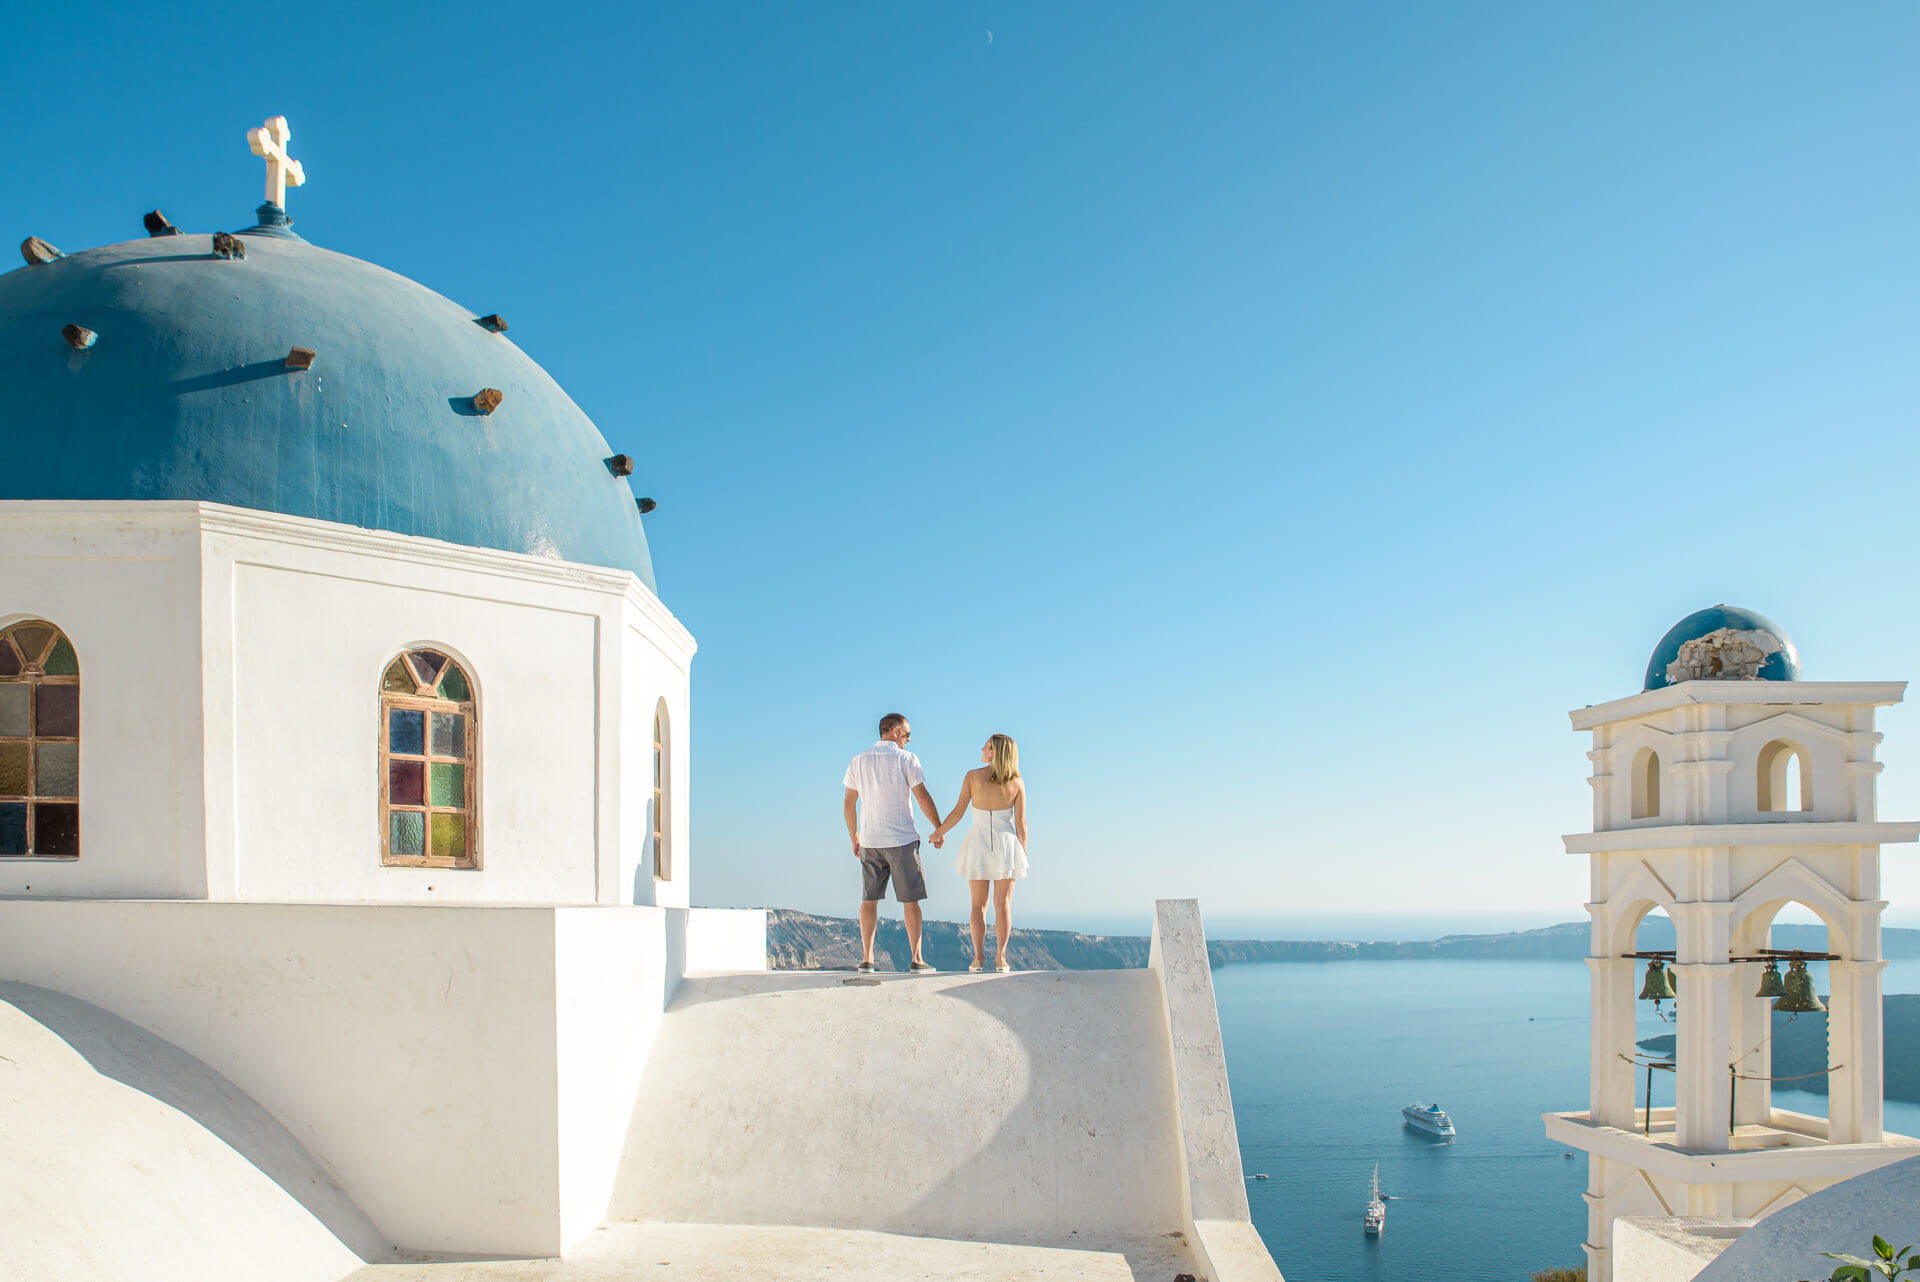 Find a Santorini Photographer: Photoshoot Prices & Packages